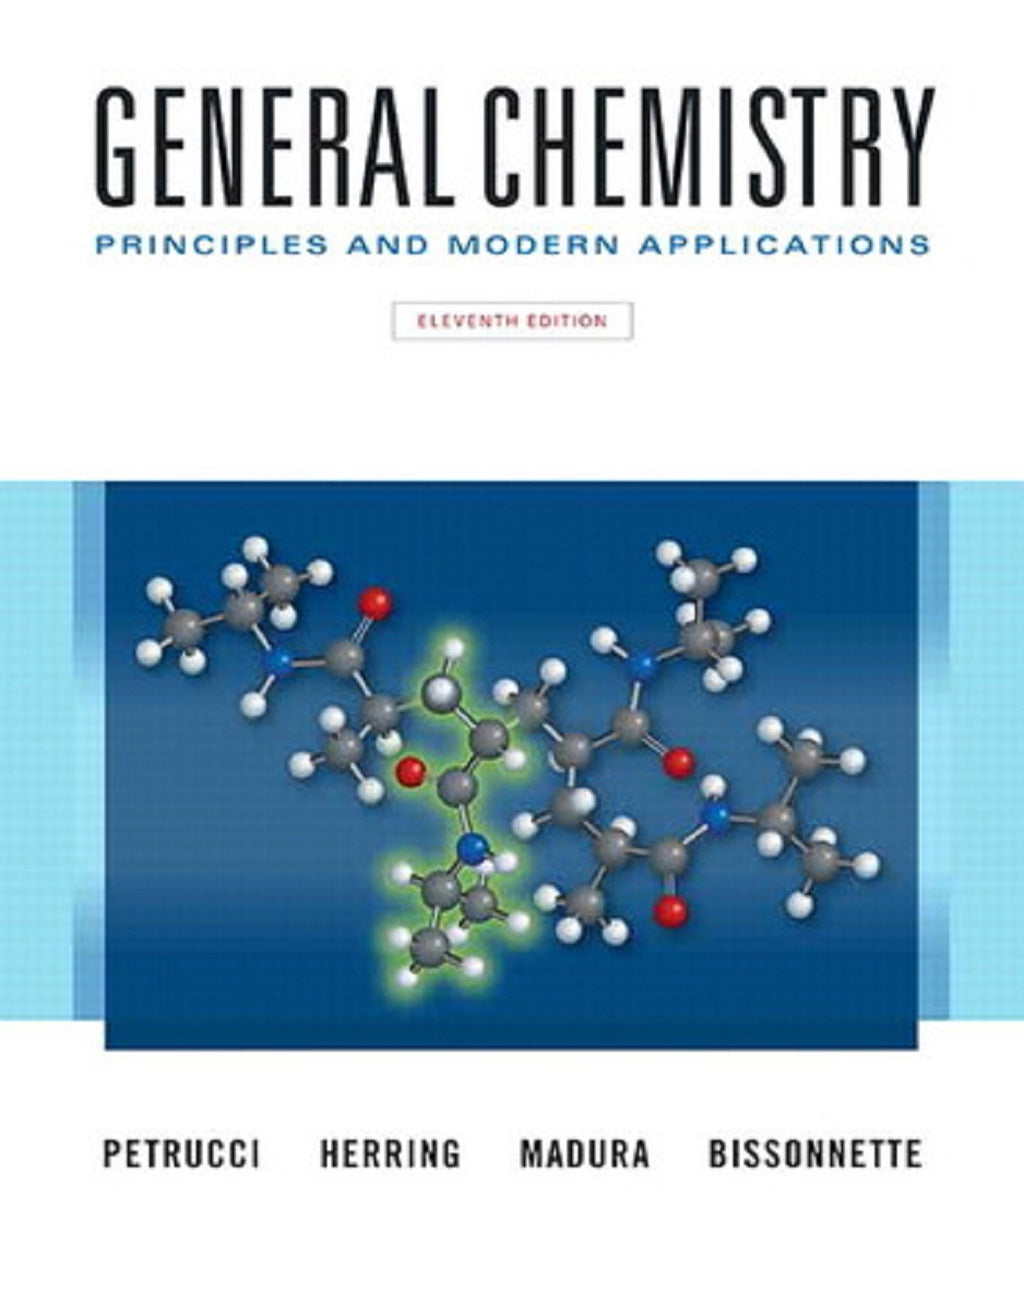 General Chemistry: Principles and Modern Applications, 11th edition